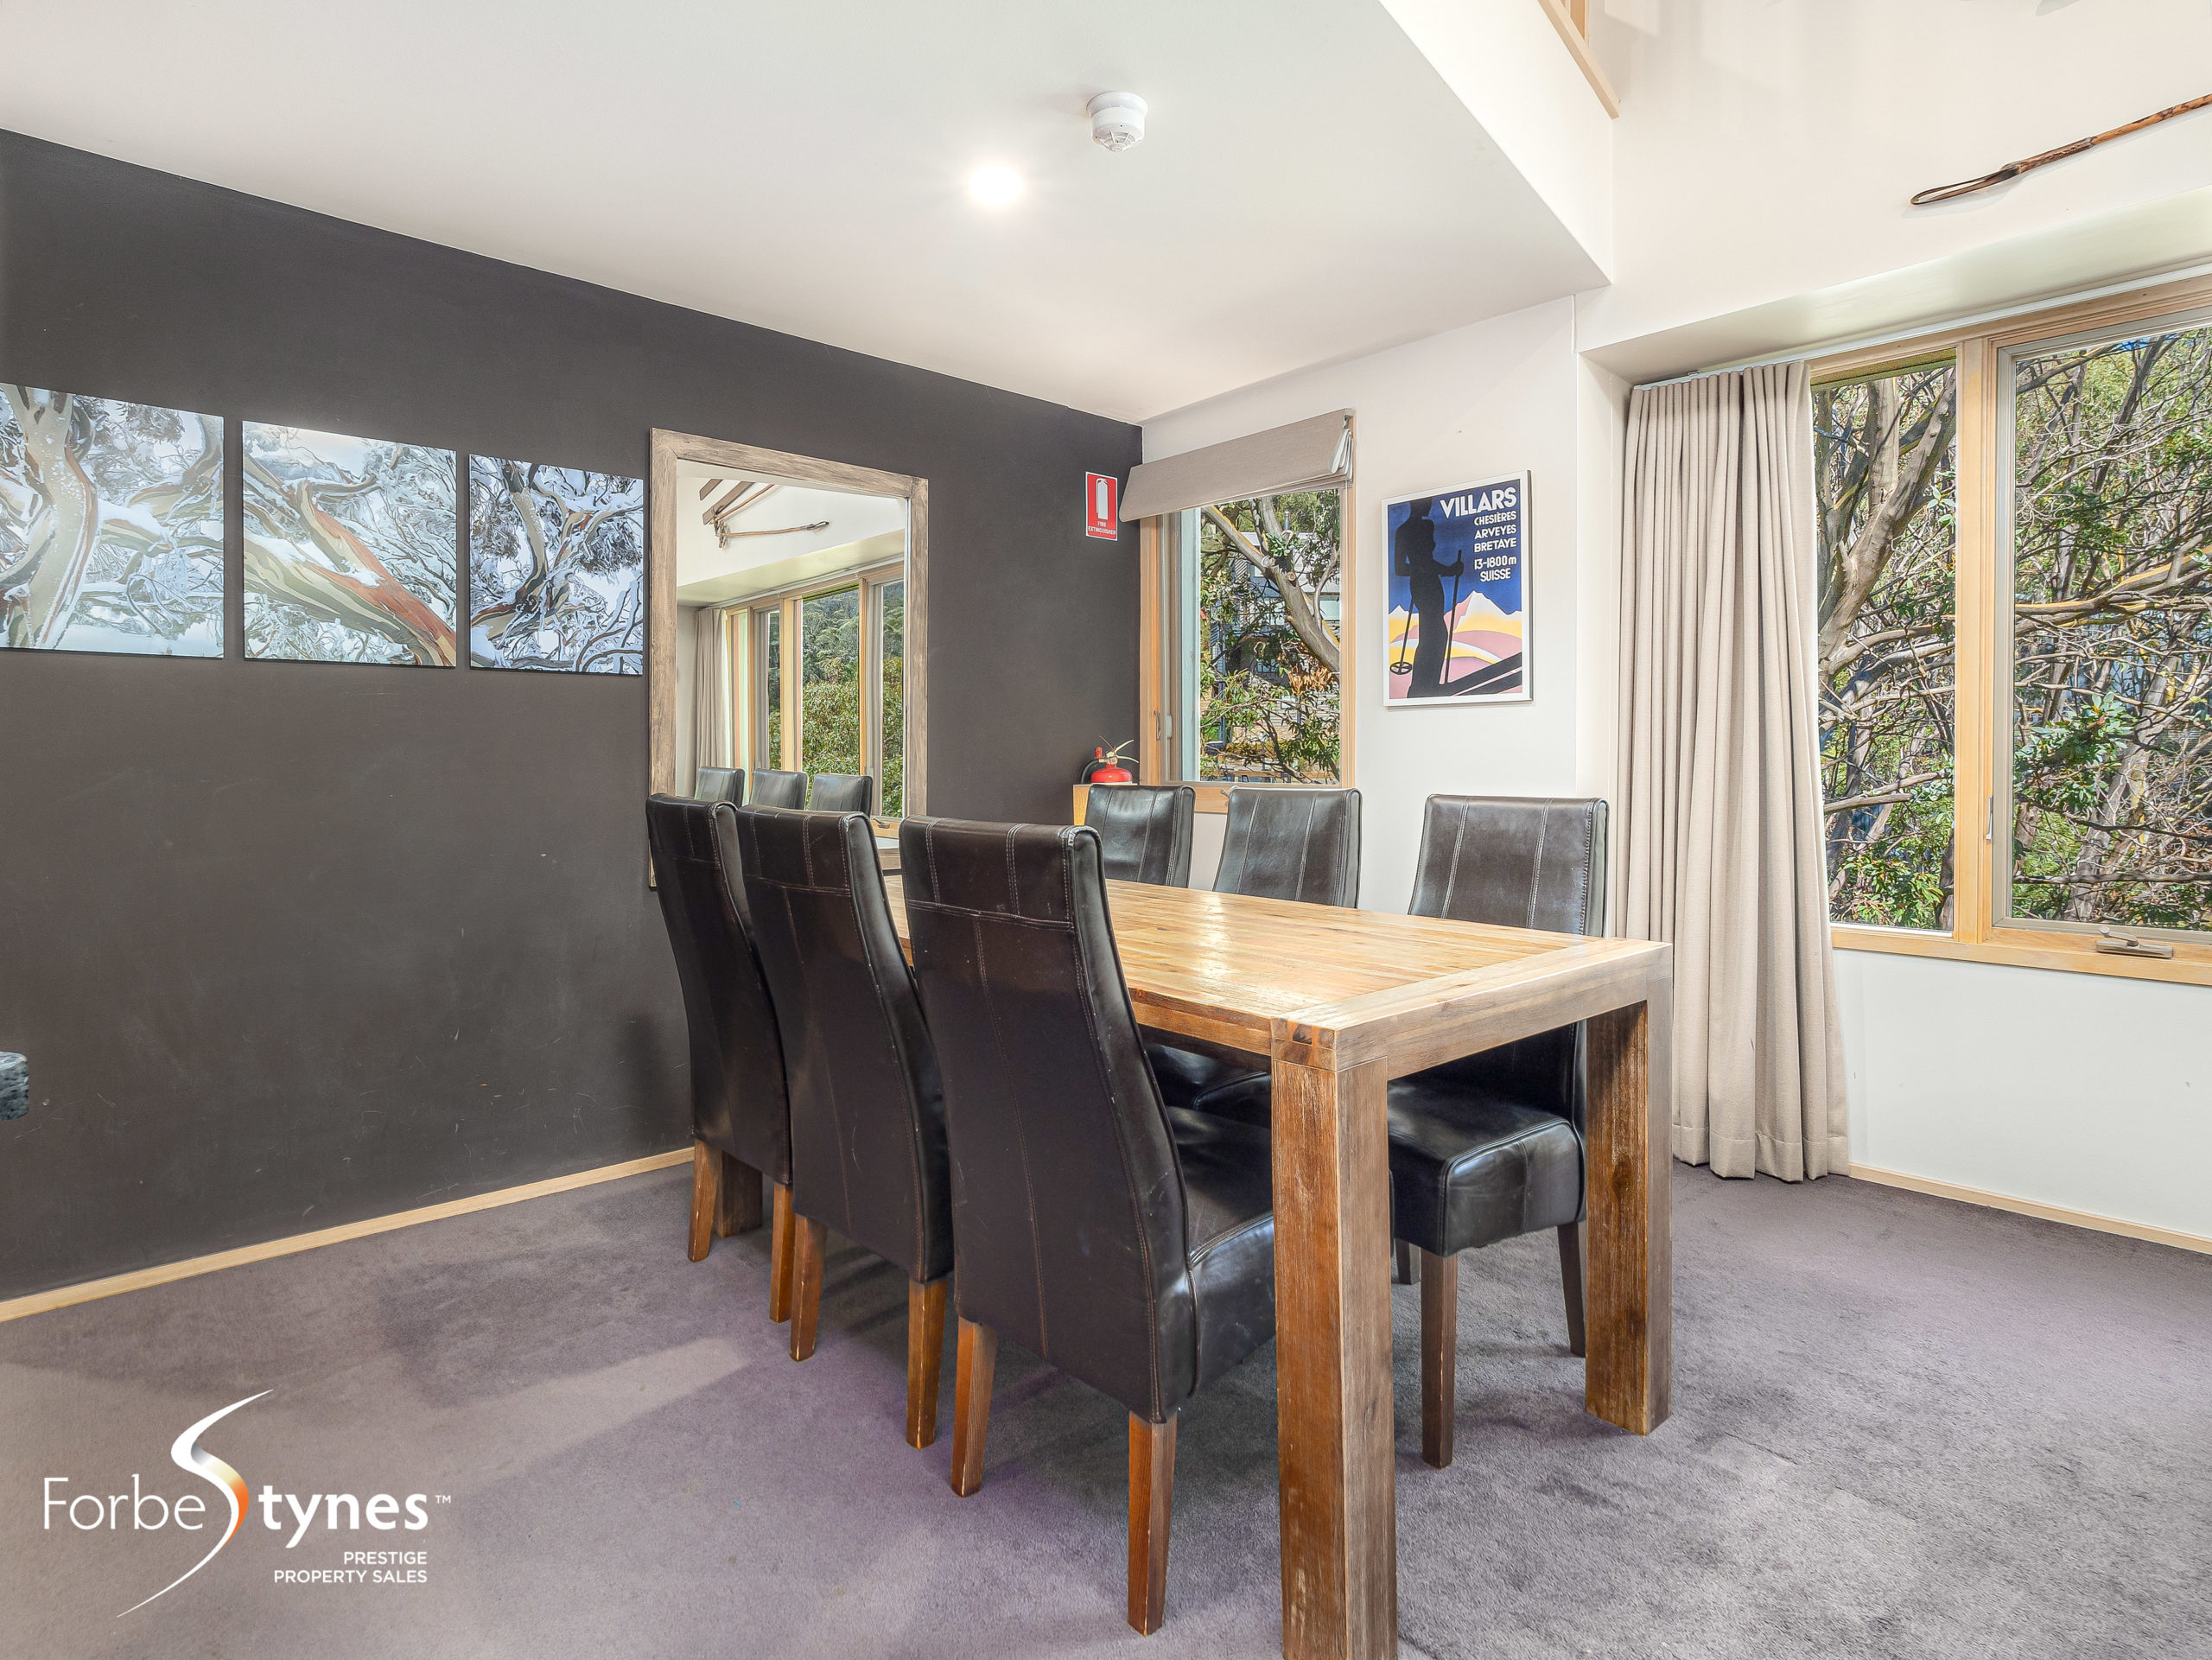 Lhotsky 4 – Central, large alpine apartment, nestled amongst the alpine snow gums with stunning north mountain views. – EOI Over $2.1M